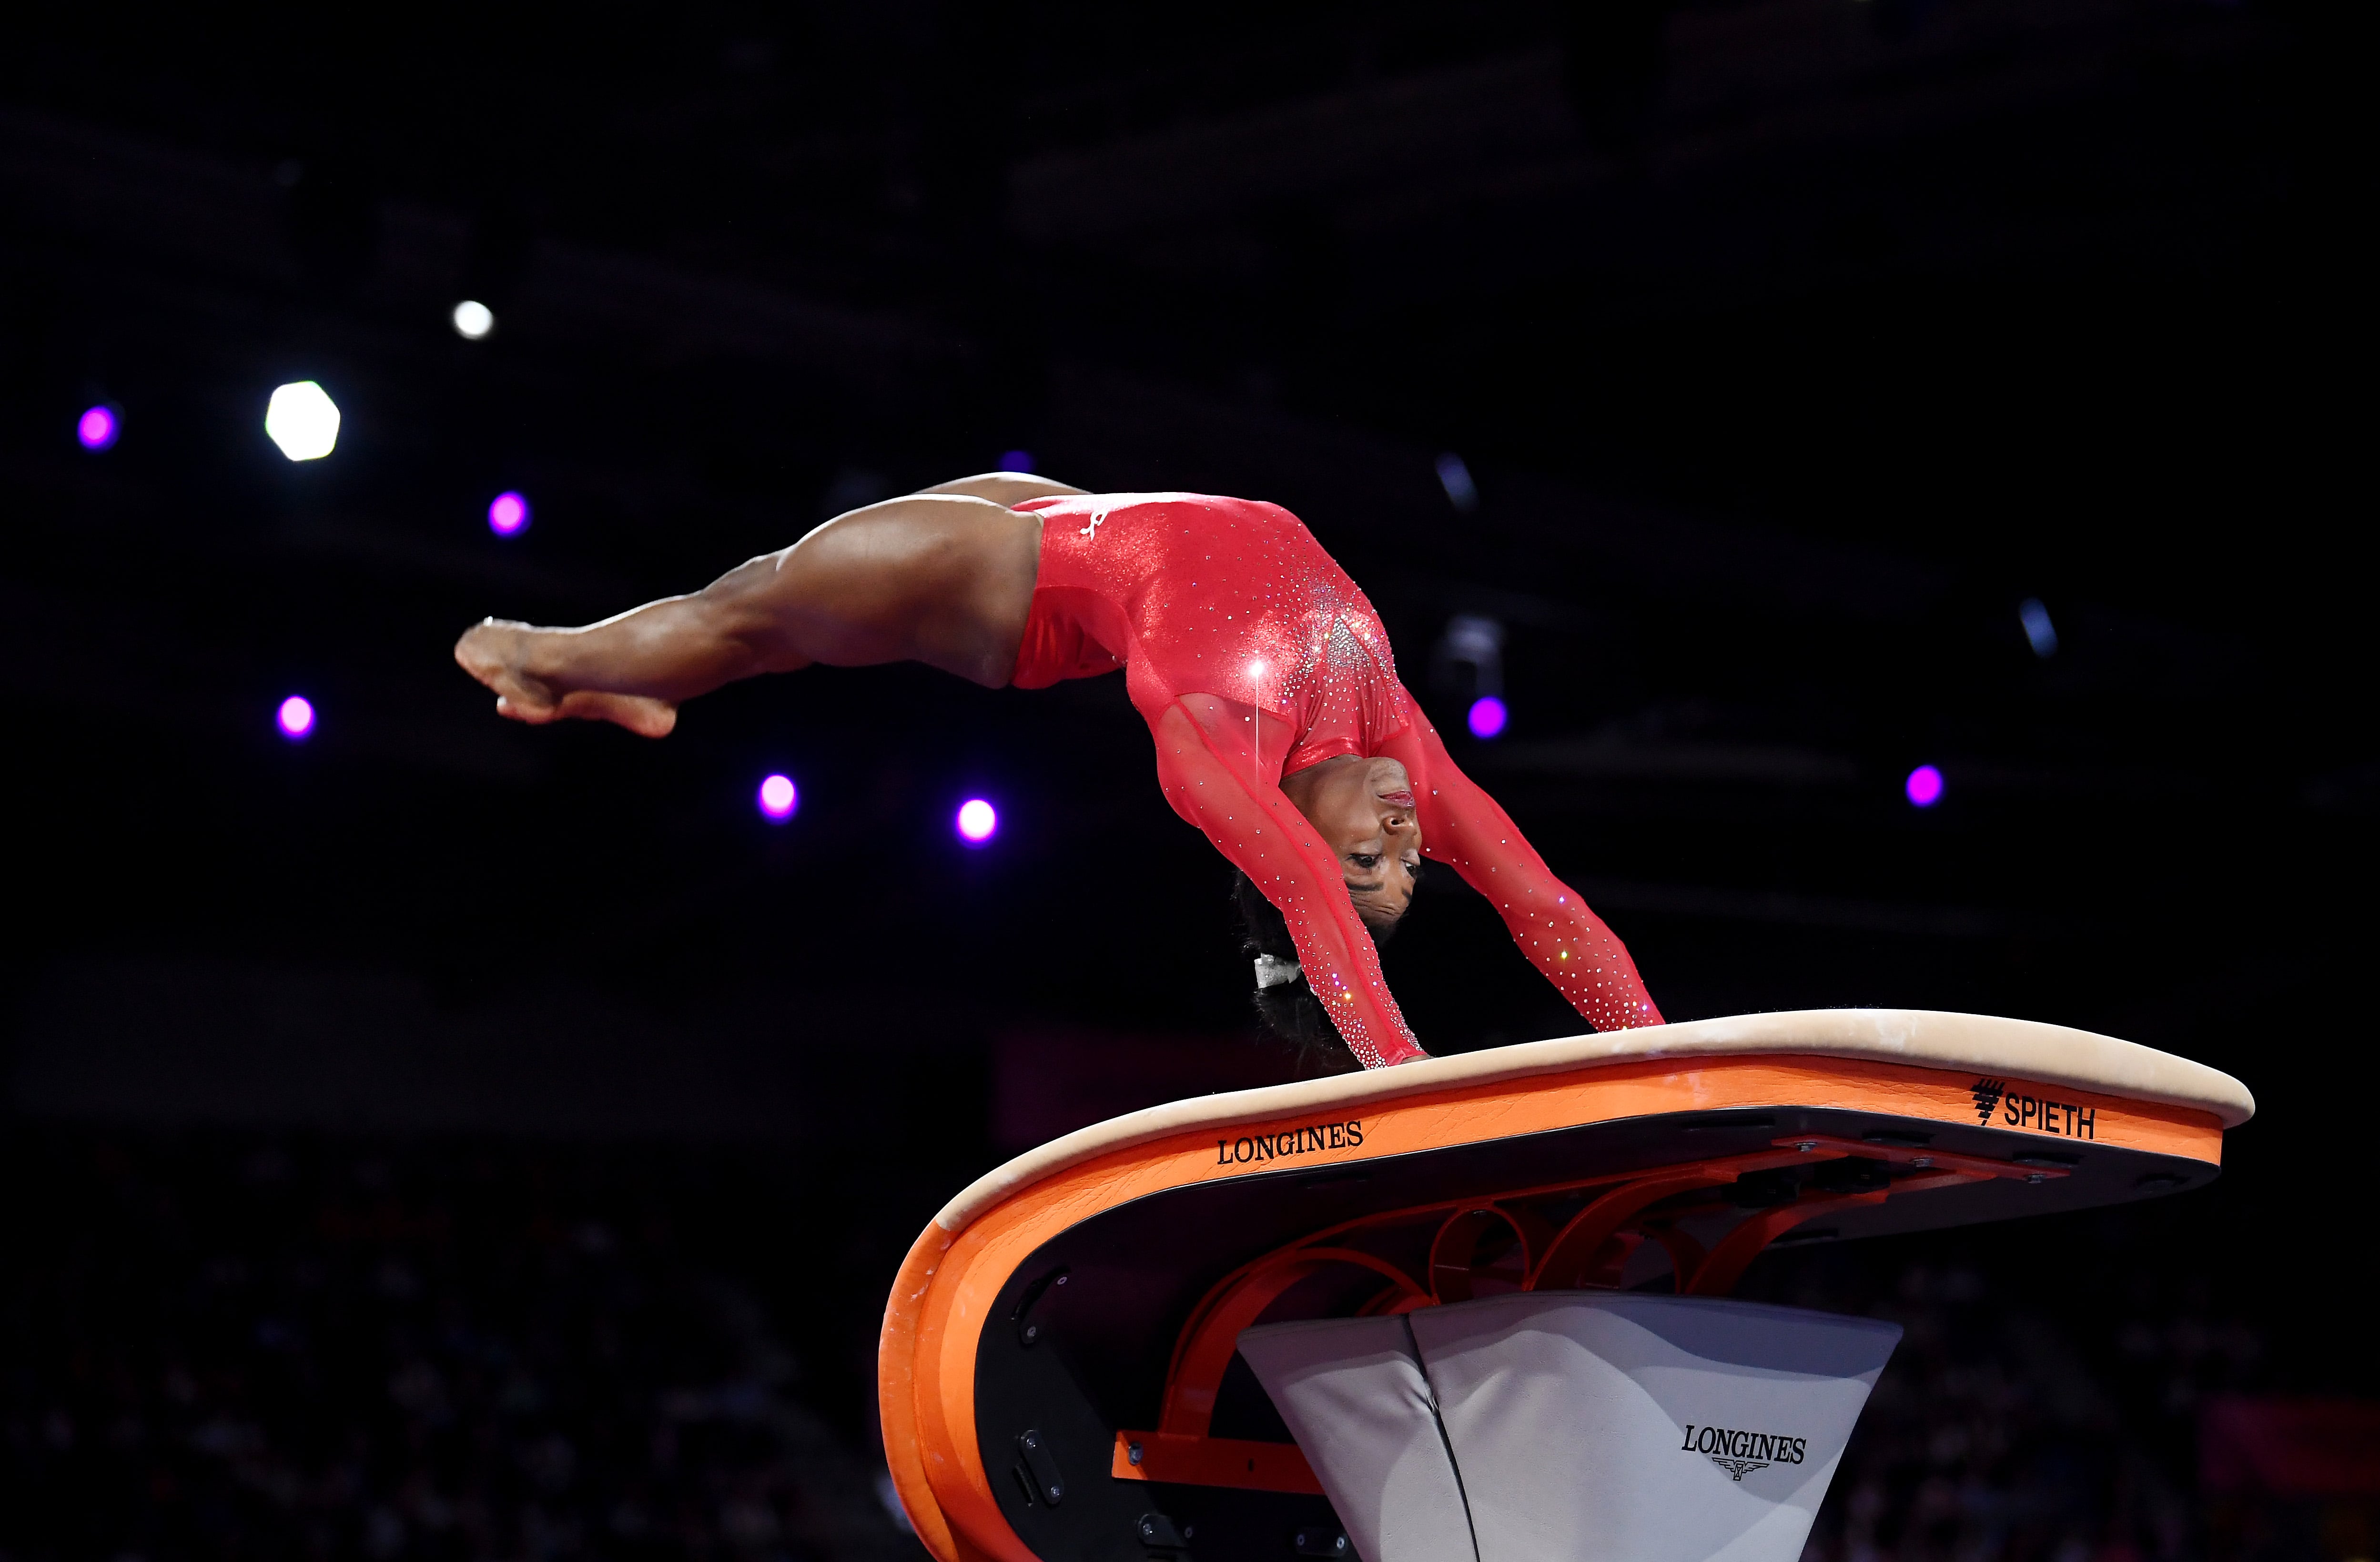 Simone Biles Has the Most Medals at World Championships